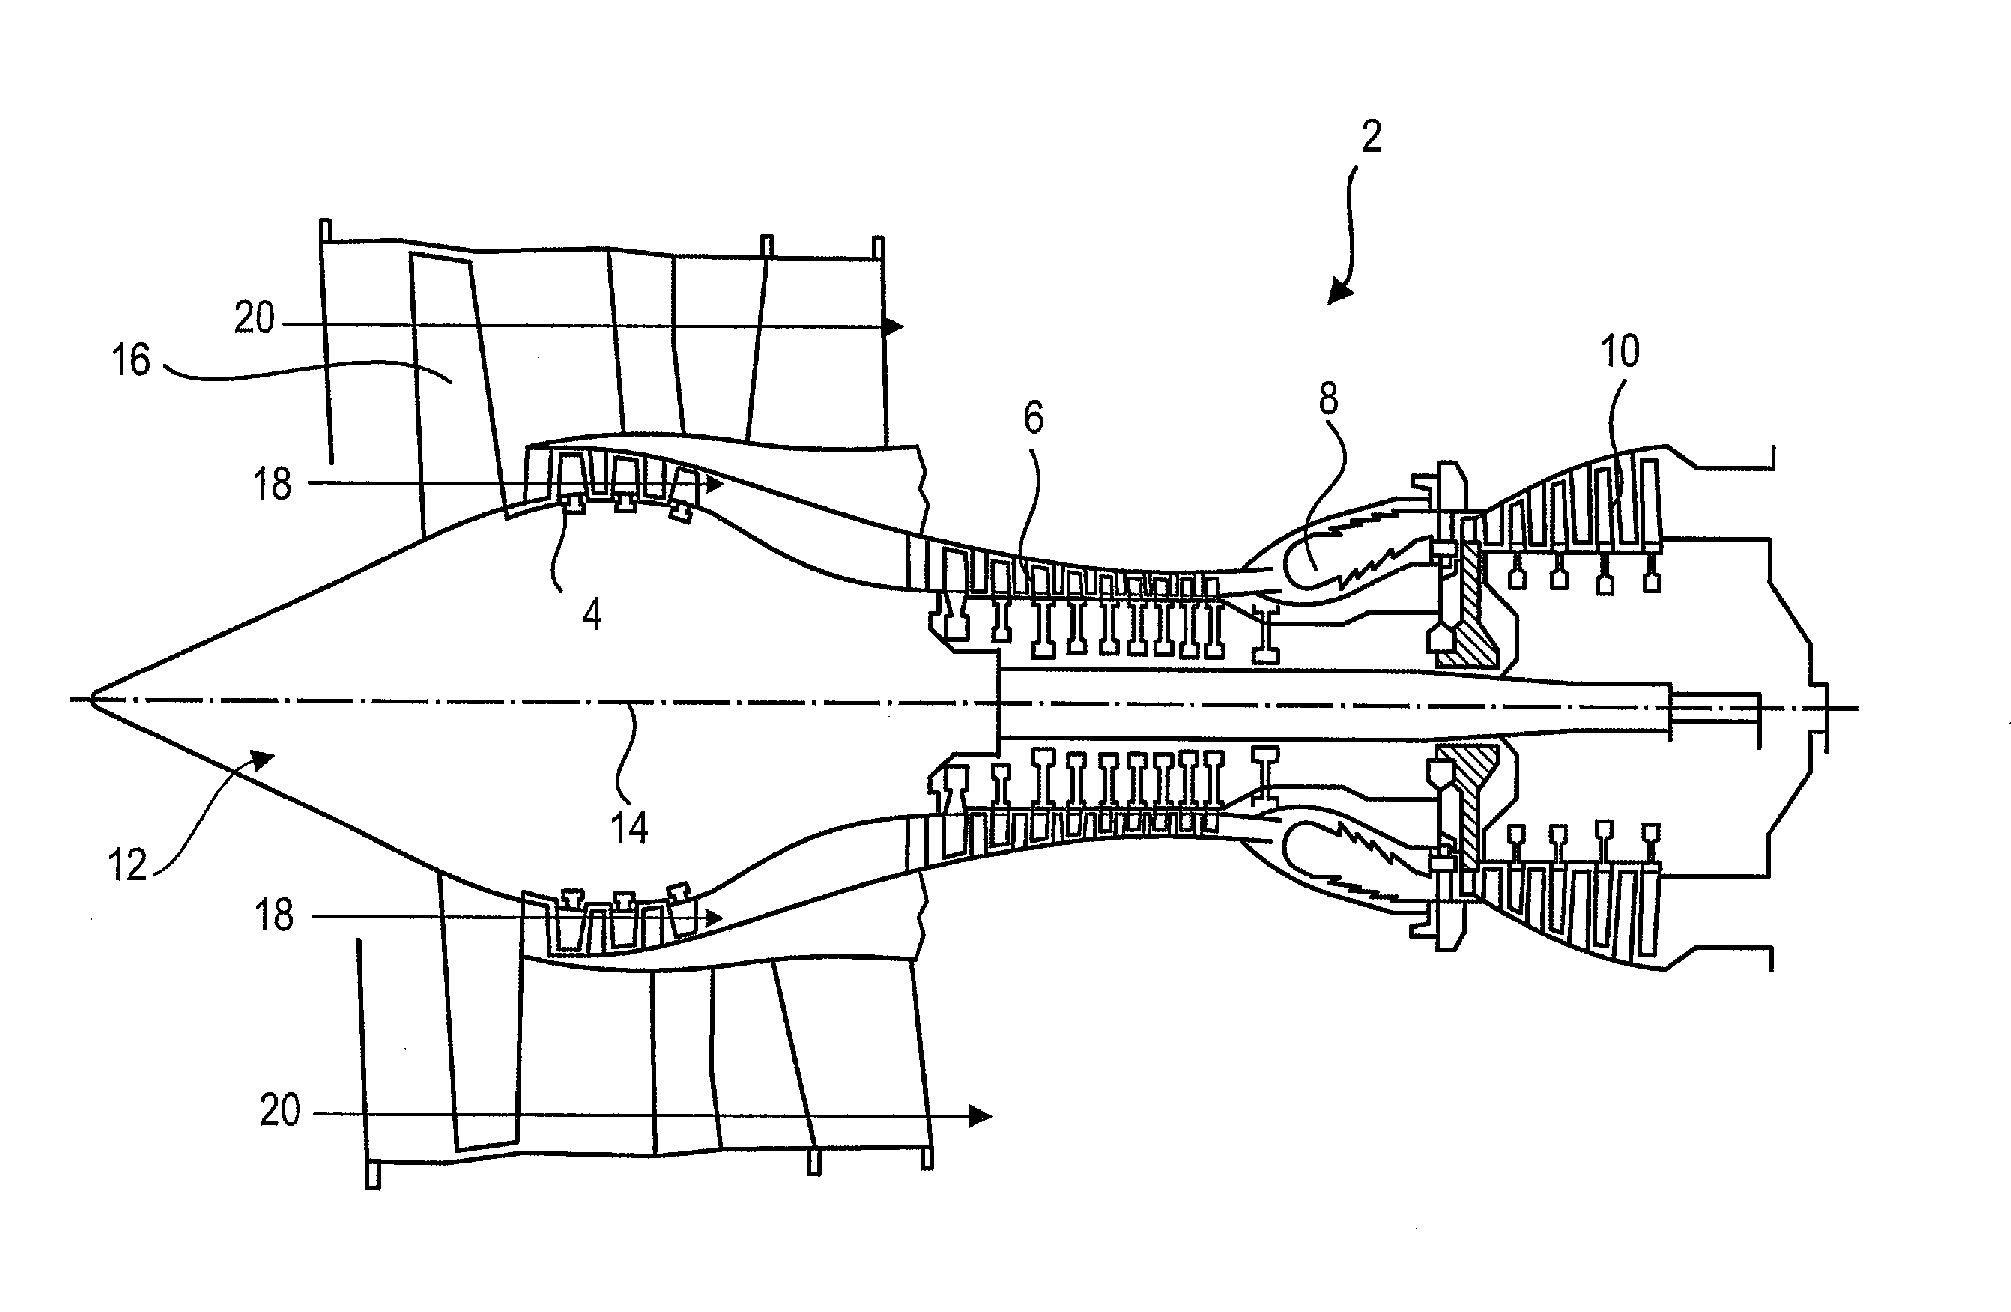 Axial turbomachine blade with platforms having an angular profile